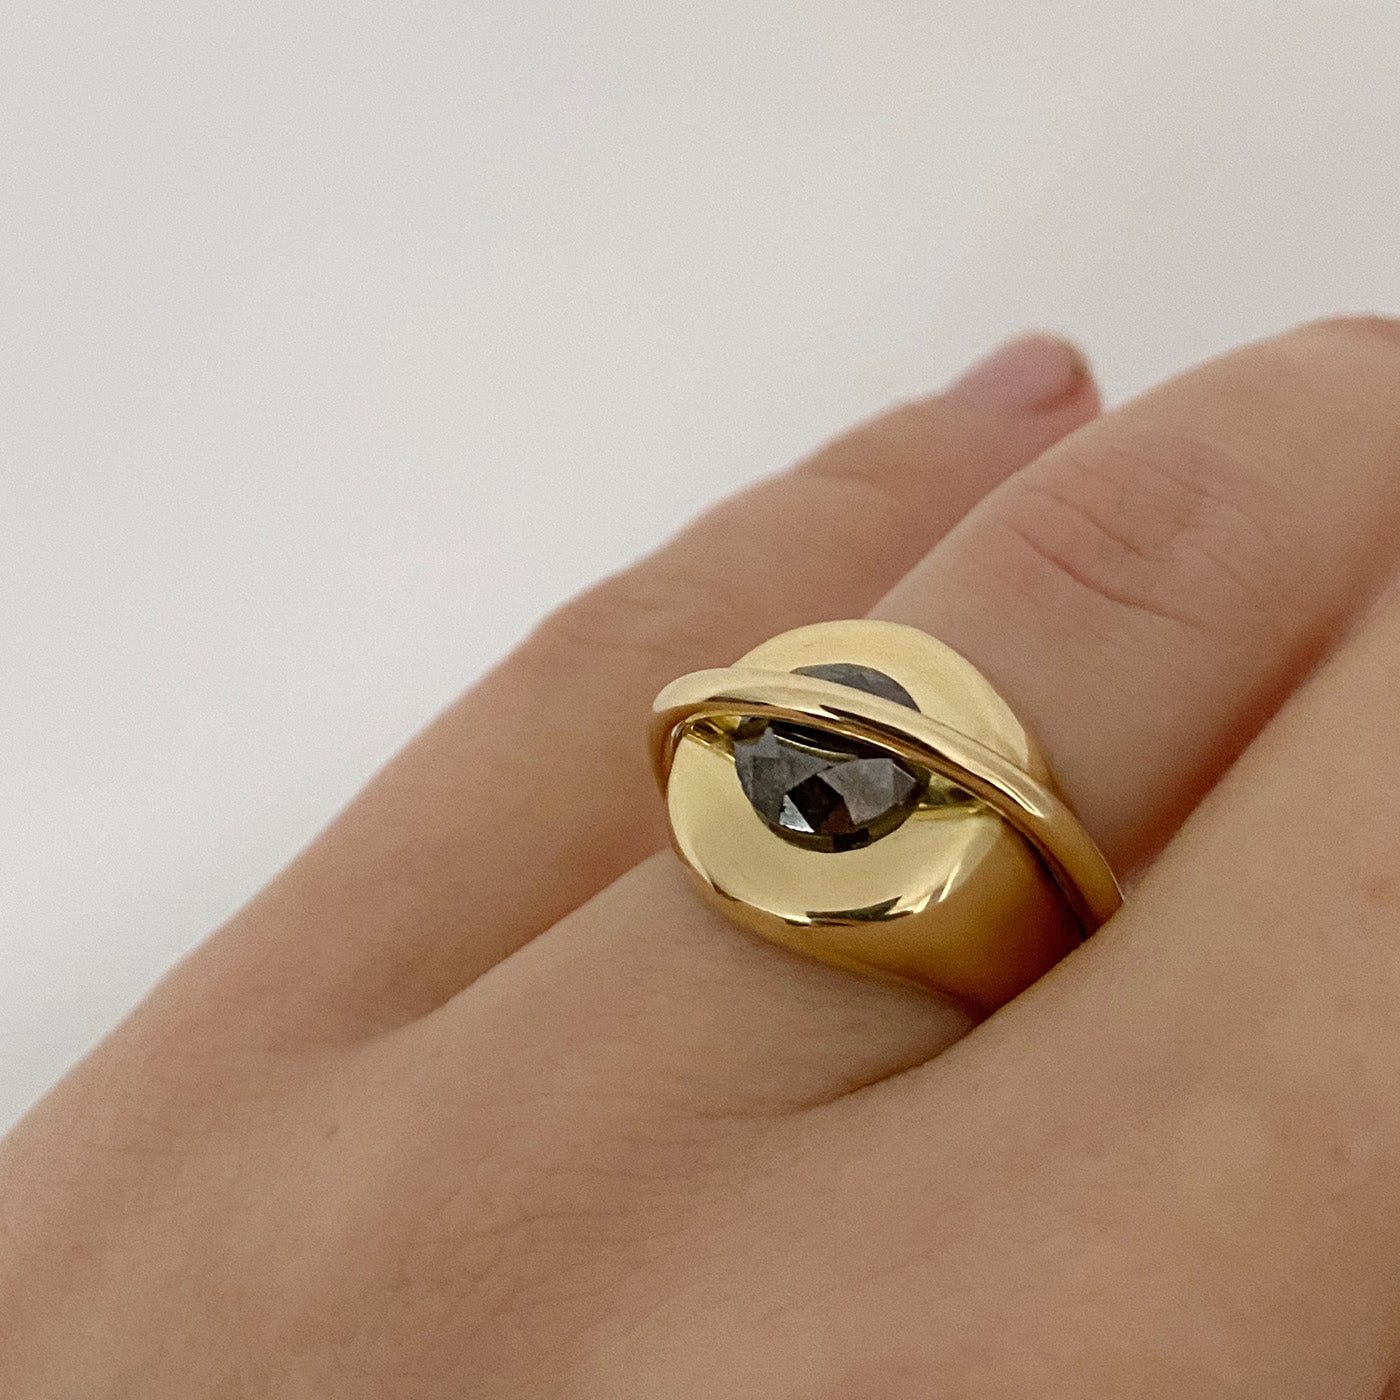 Ring chaotic signet product view 18 ct yellow gold 2.3 ct dark amber diamond innan jewellery independent atelier berlin